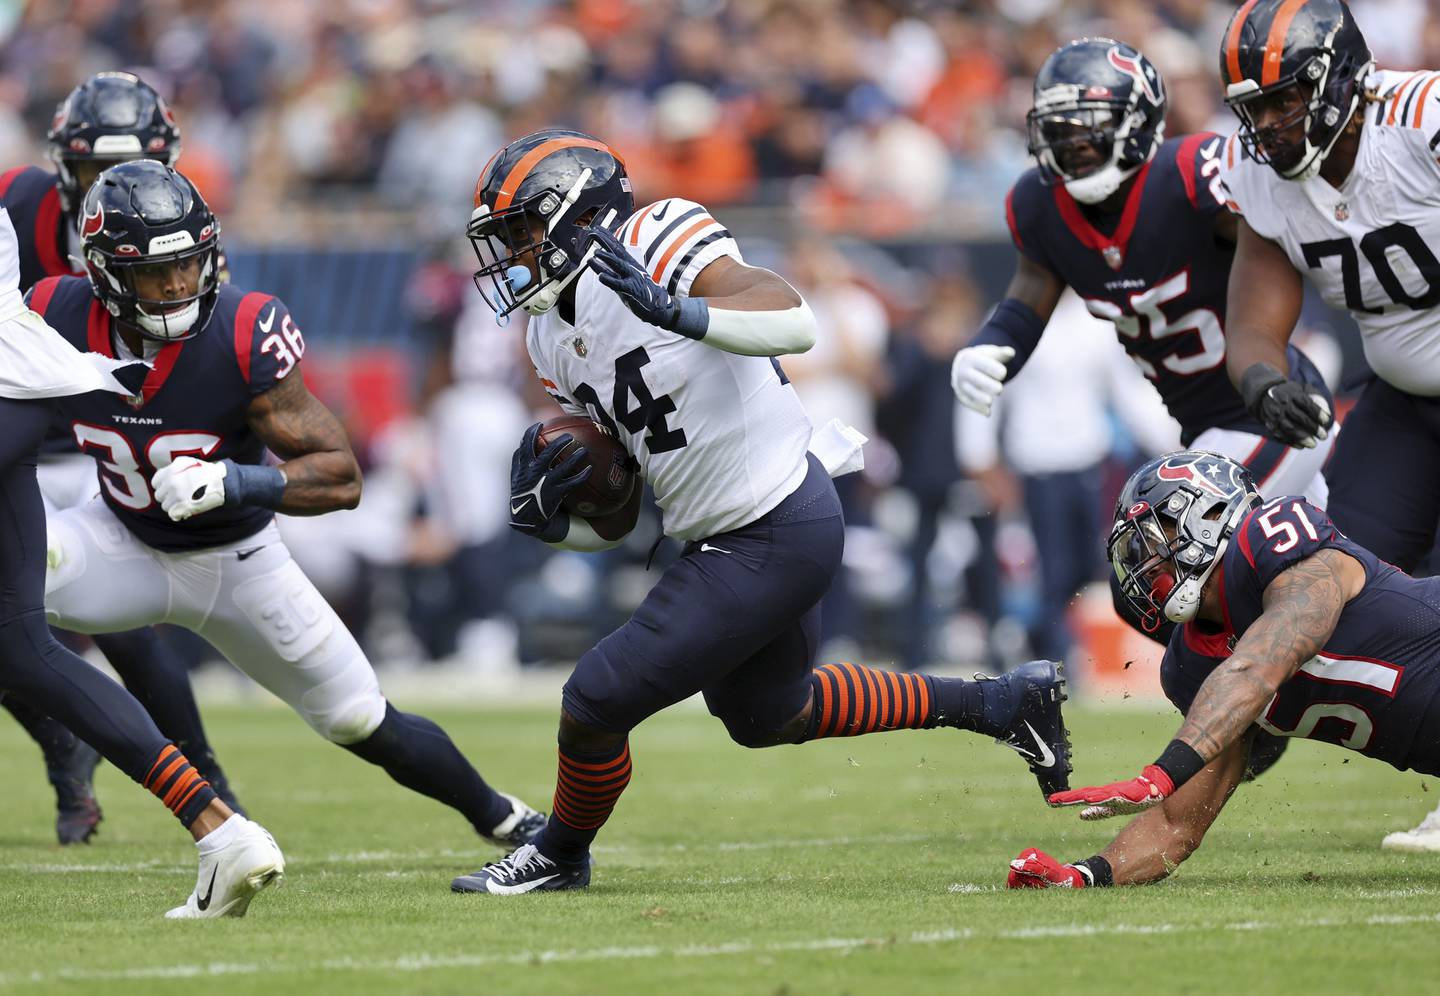 Bears running back Khalil Herbert makes a move in the second quarter of the Week 3 game at Soldier Field on Sept. 25, 2022.